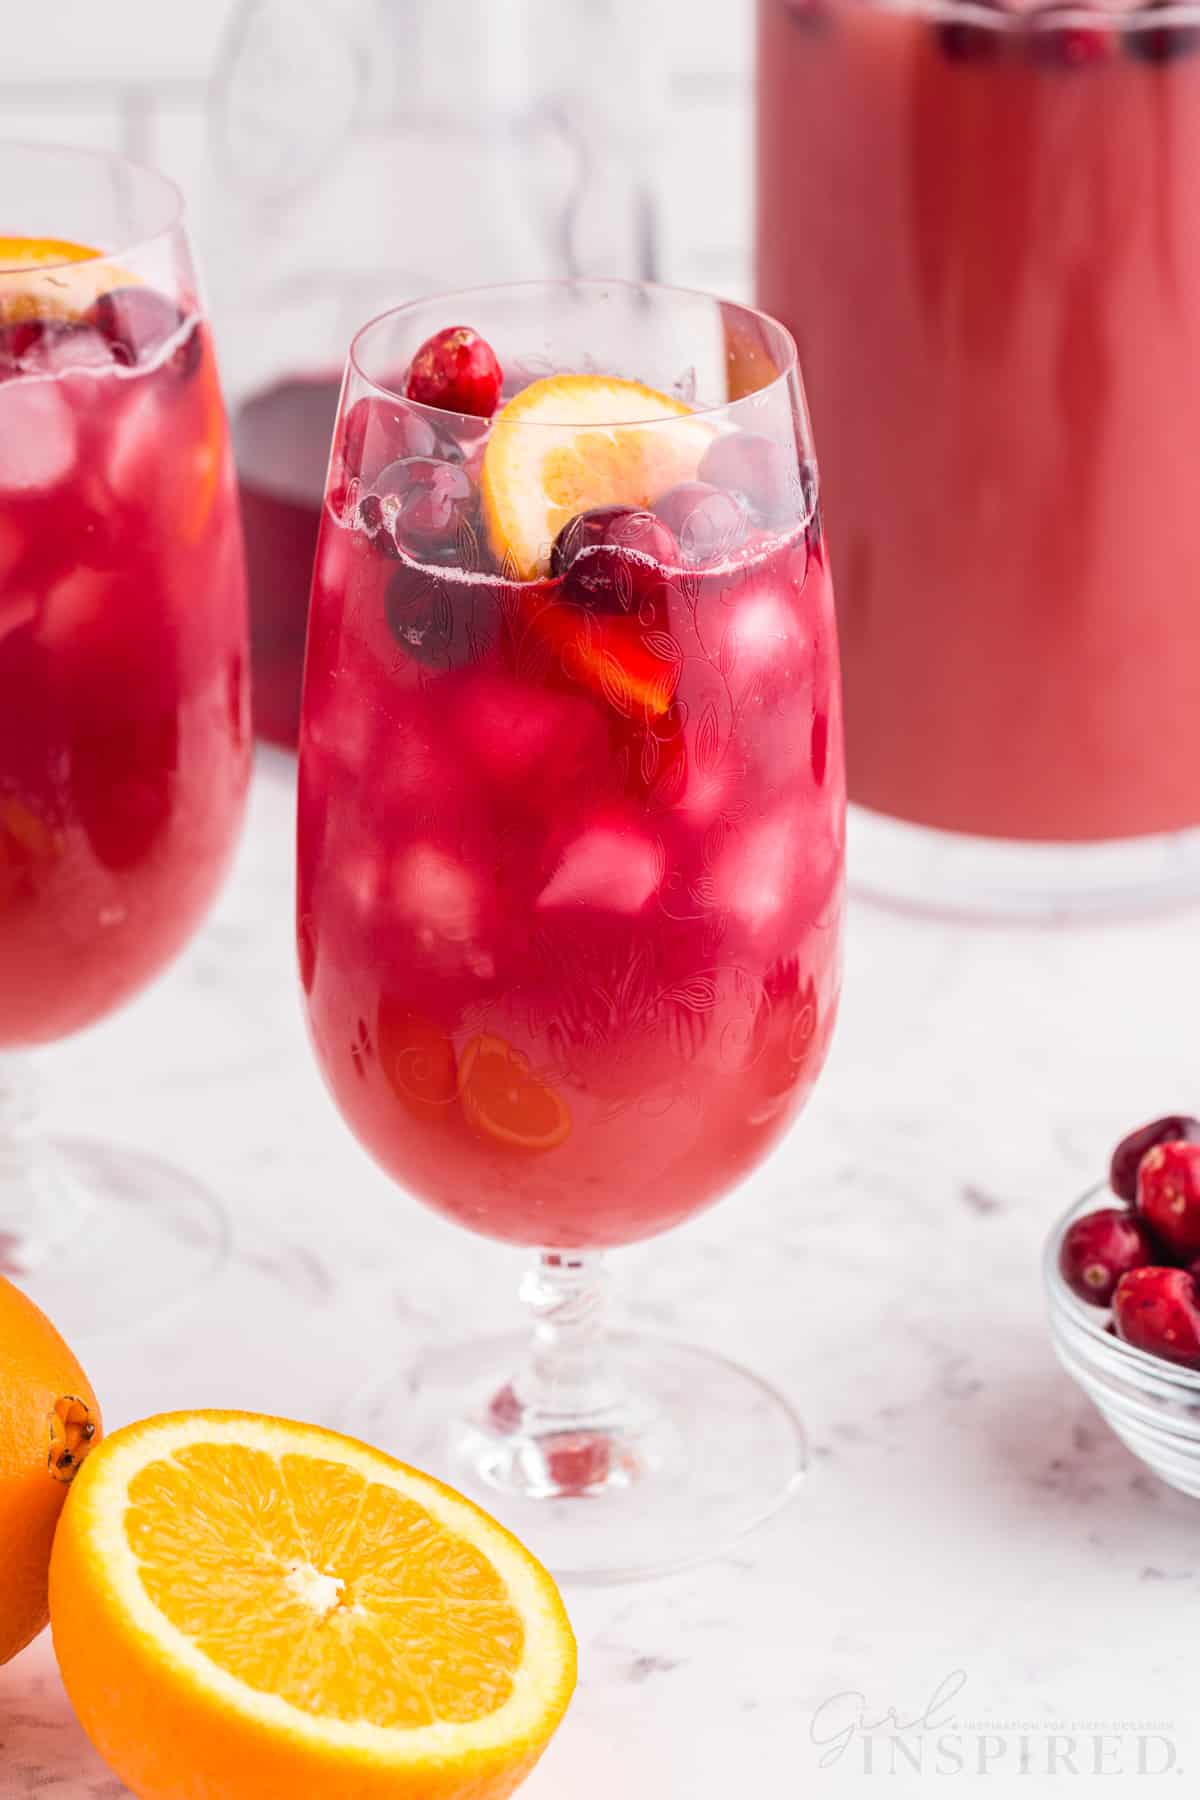 Two glasses of Christmas punch made using the Christmas punch recipe (non alcoholic), on a marble countertop, halved fresh orange, pitcher with Christmas punch, bowl of cranberries, white tiled background.